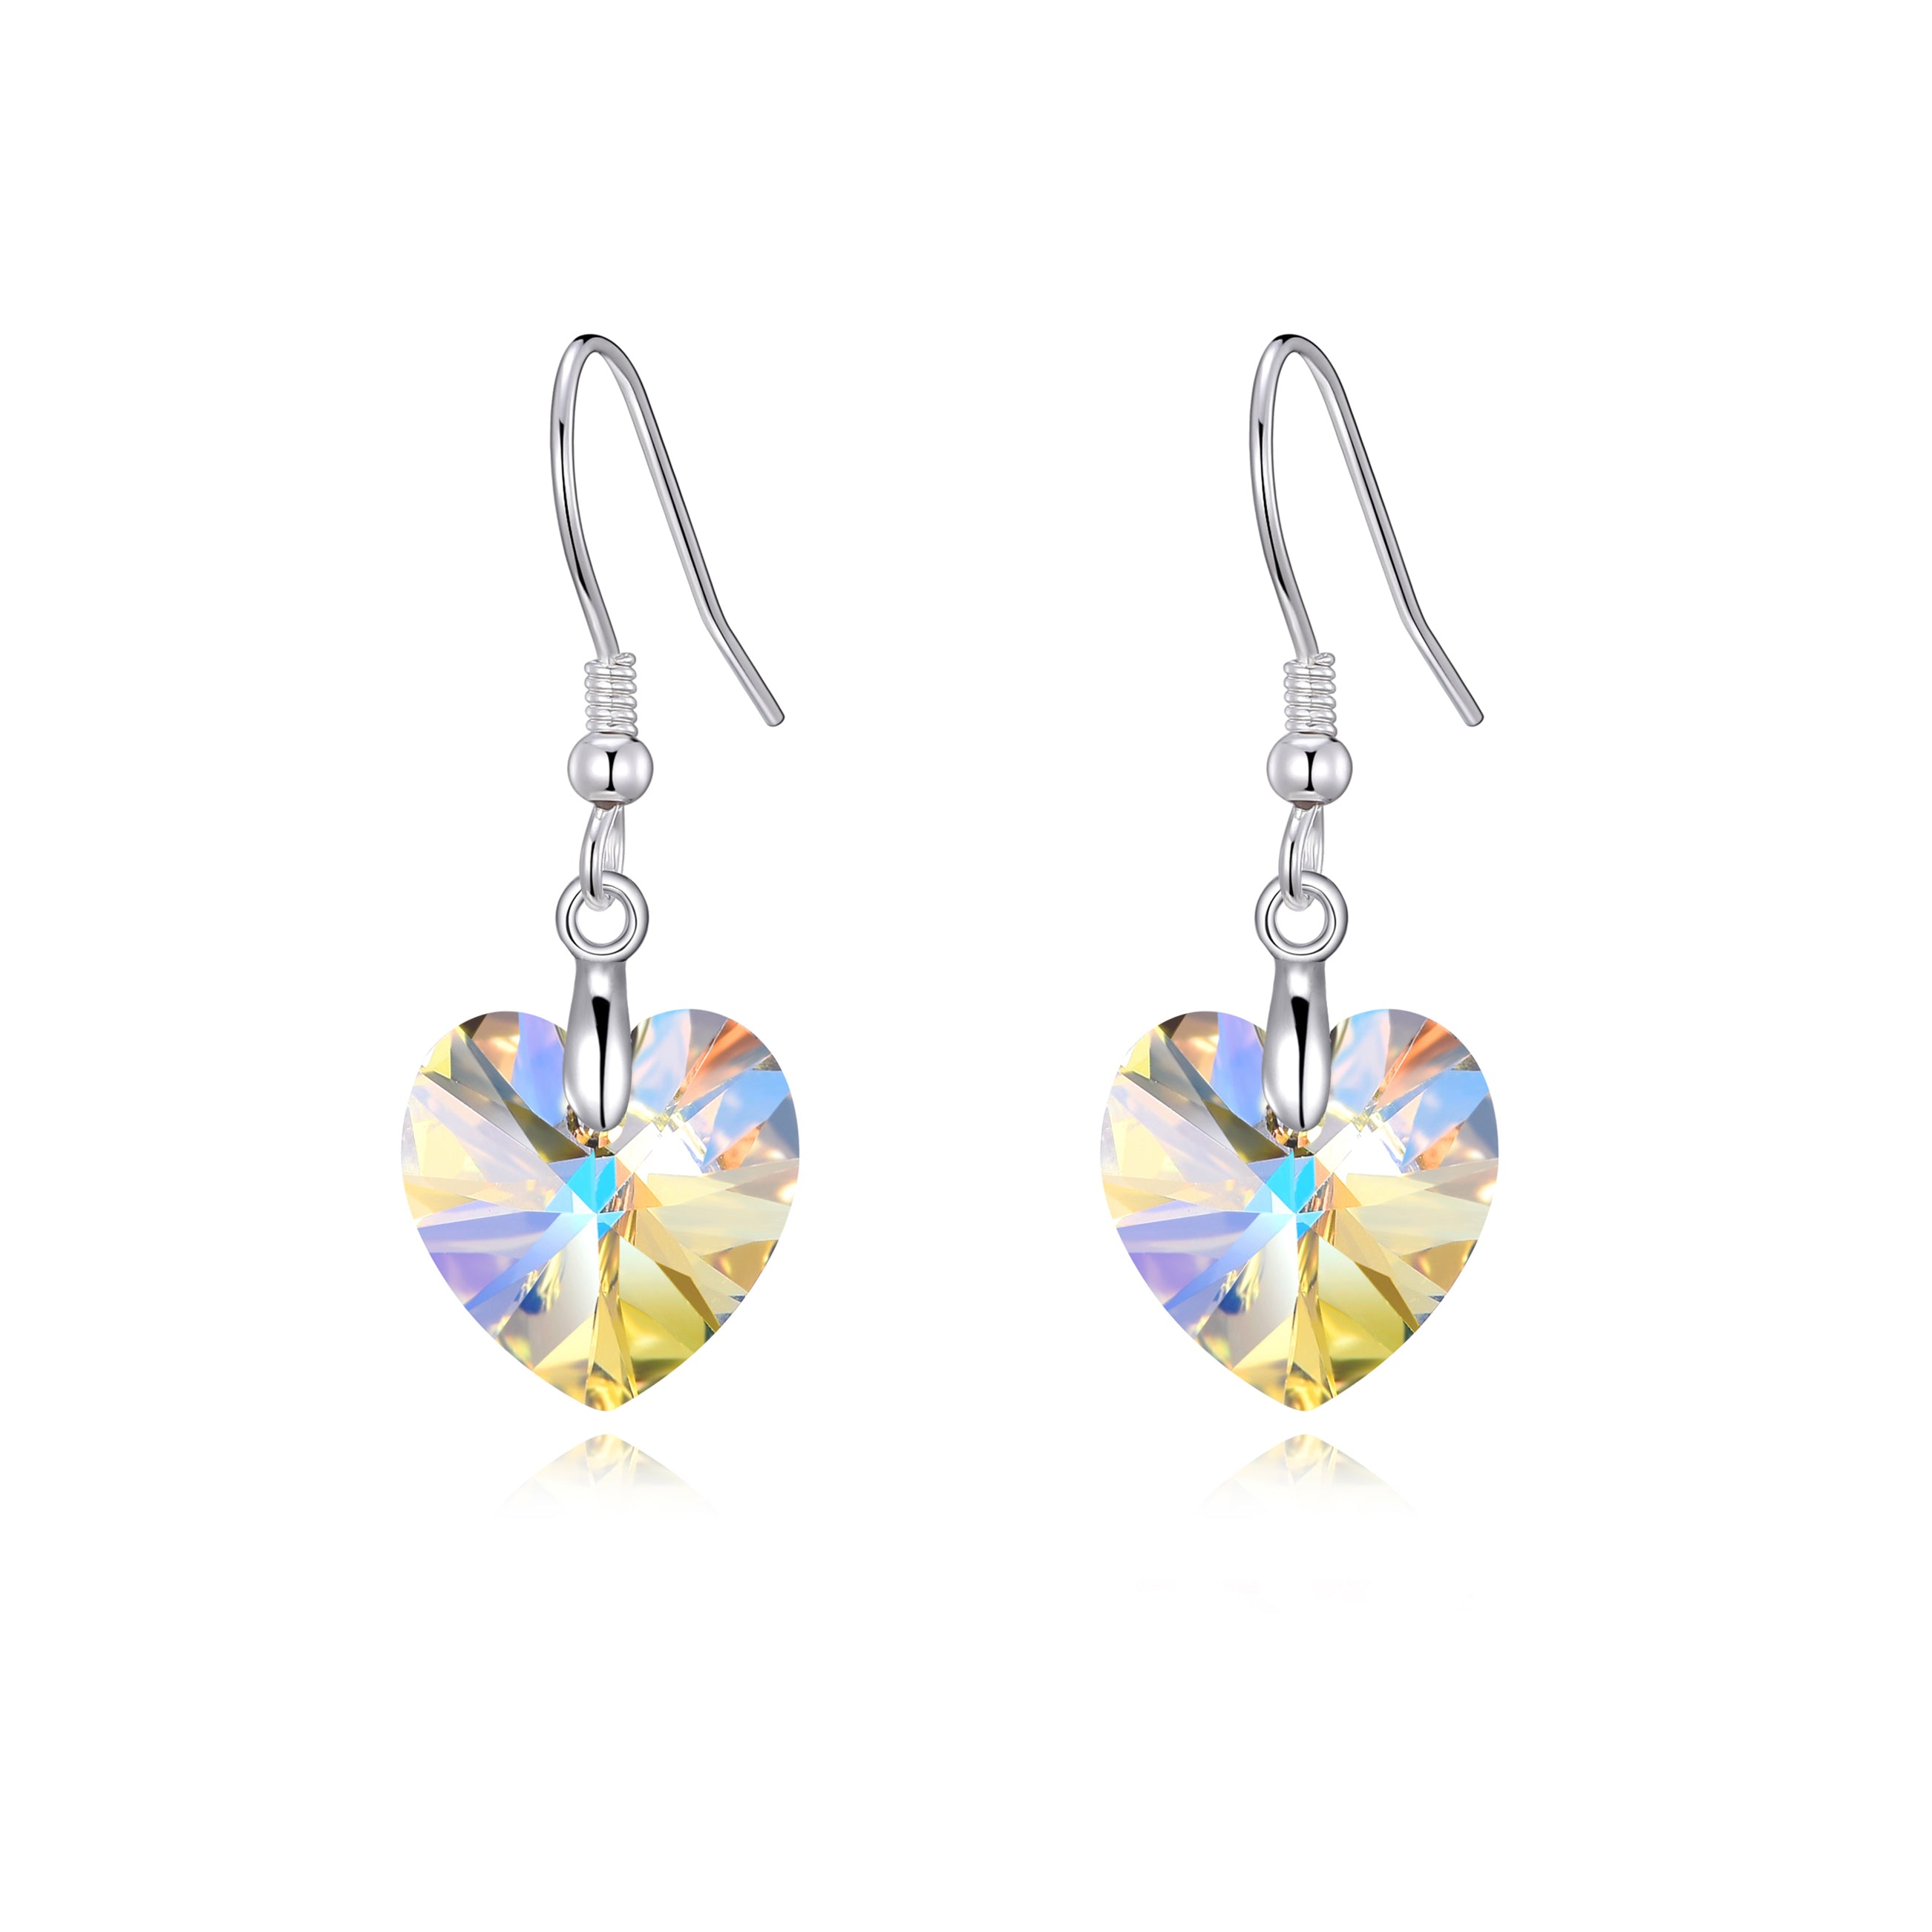 Sterling Silver Aurore Boreale Heart Earrings Created with Zircondia® Crystals